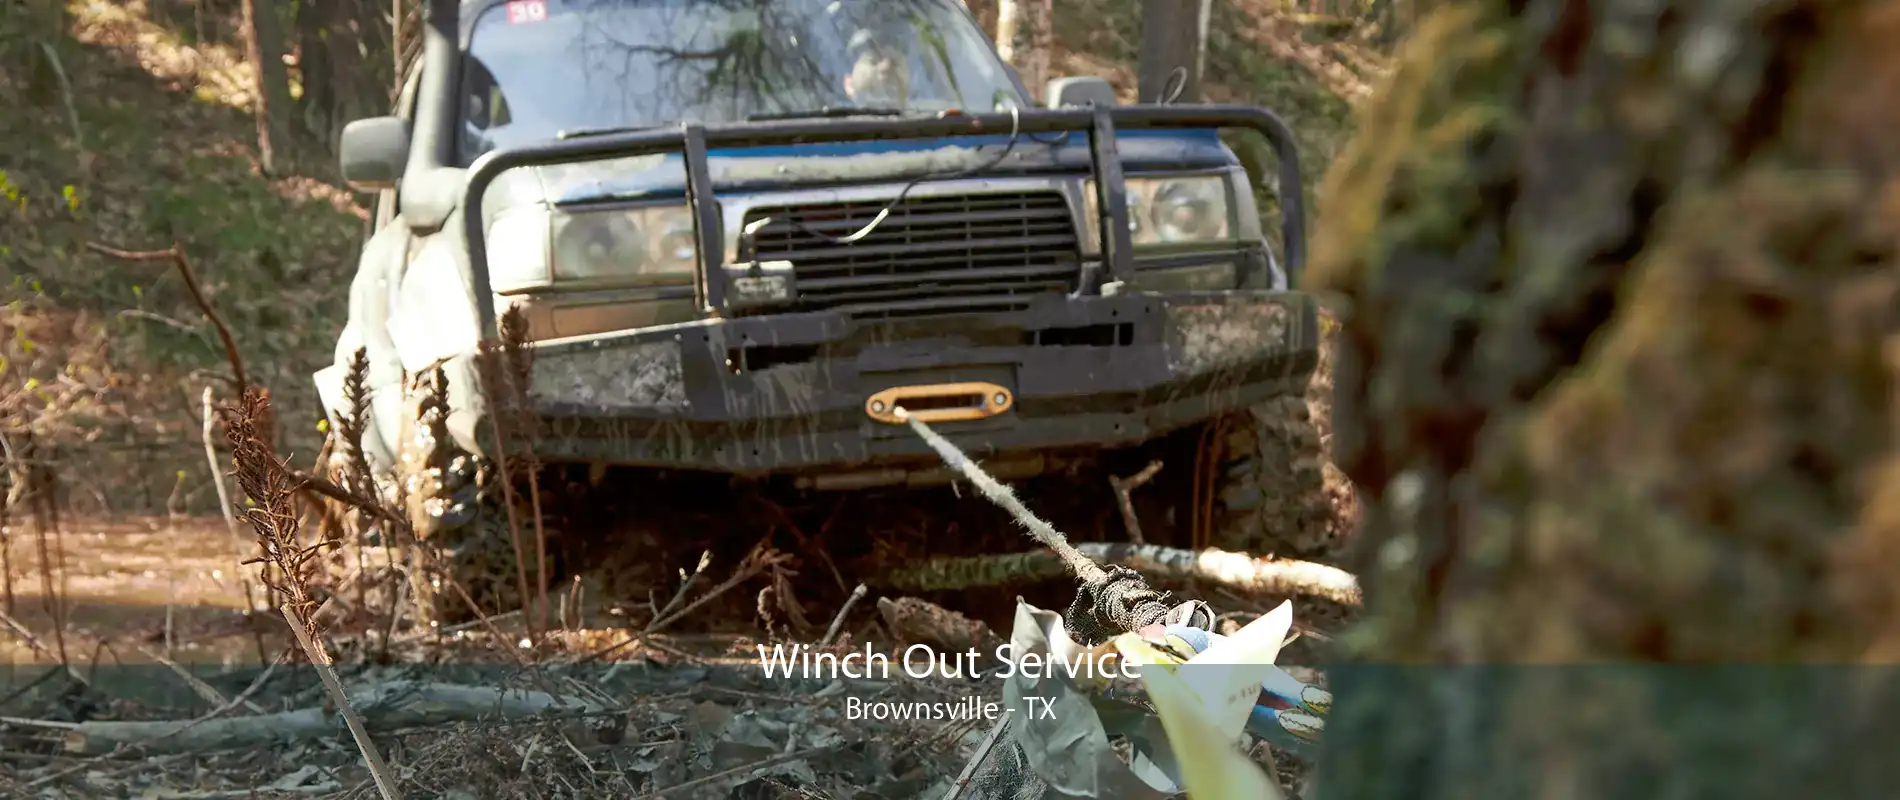 Winch Out Service Brownsville - TX